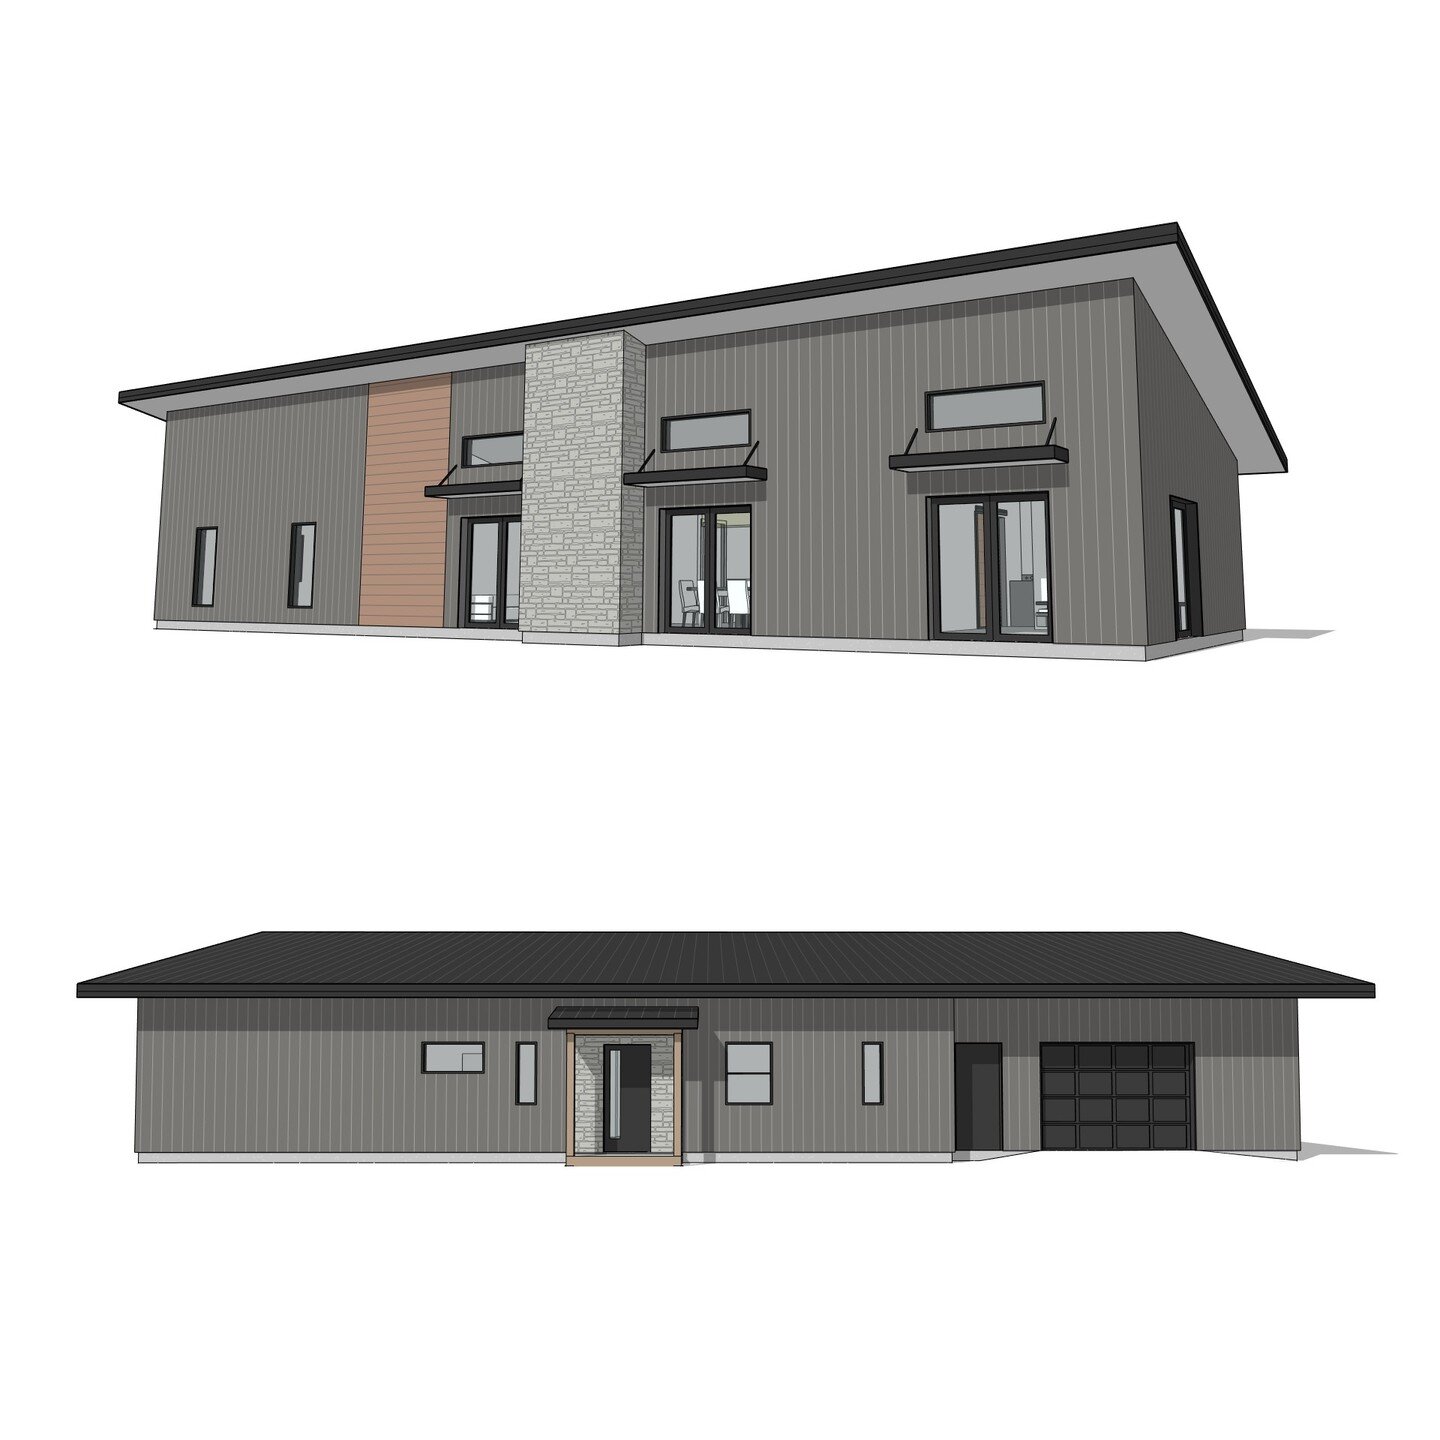 1 storey residence with attached garage. #residence #metalsiding #attachedgarage #slabongrade #modern #perspective #revit #architecture #aja #adamjodoinarchitectural #design